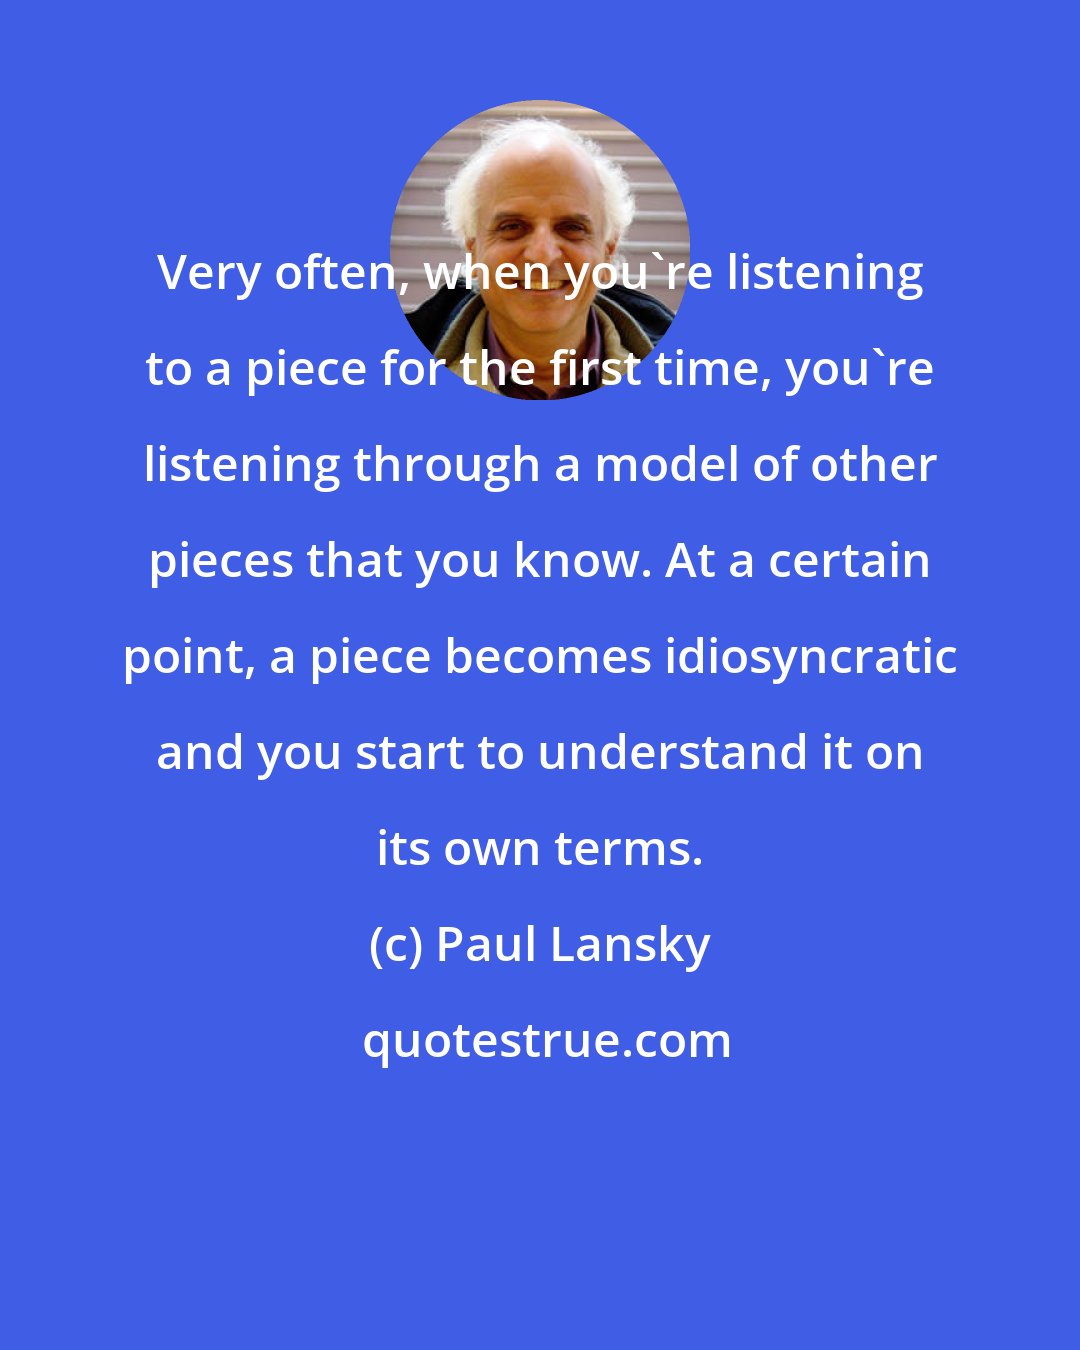 Paul Lansky: Very often, when you're listening to a piece for the first time, you're listening through a model of other pieces that you know. At a certain point, a piece becomes idiosyncratic and you start to understand it on its own terms.